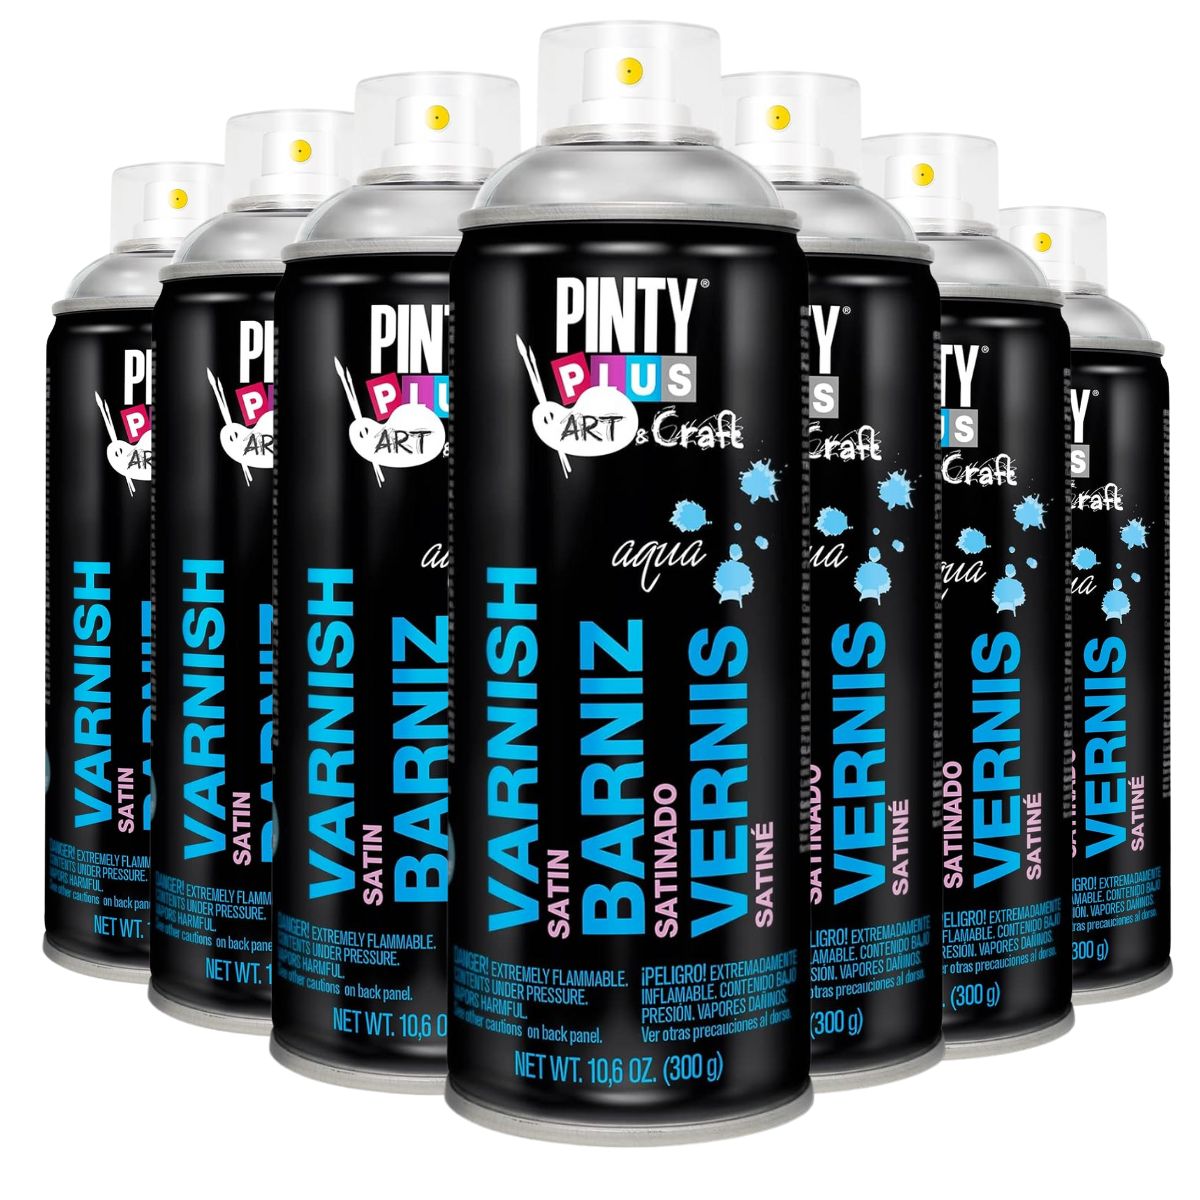 PINTY PLUS WATERBASED TIMBER VARNISH CLEAR SATIN AEROSOL 300G (6 Cans) - South East Clearance Centre